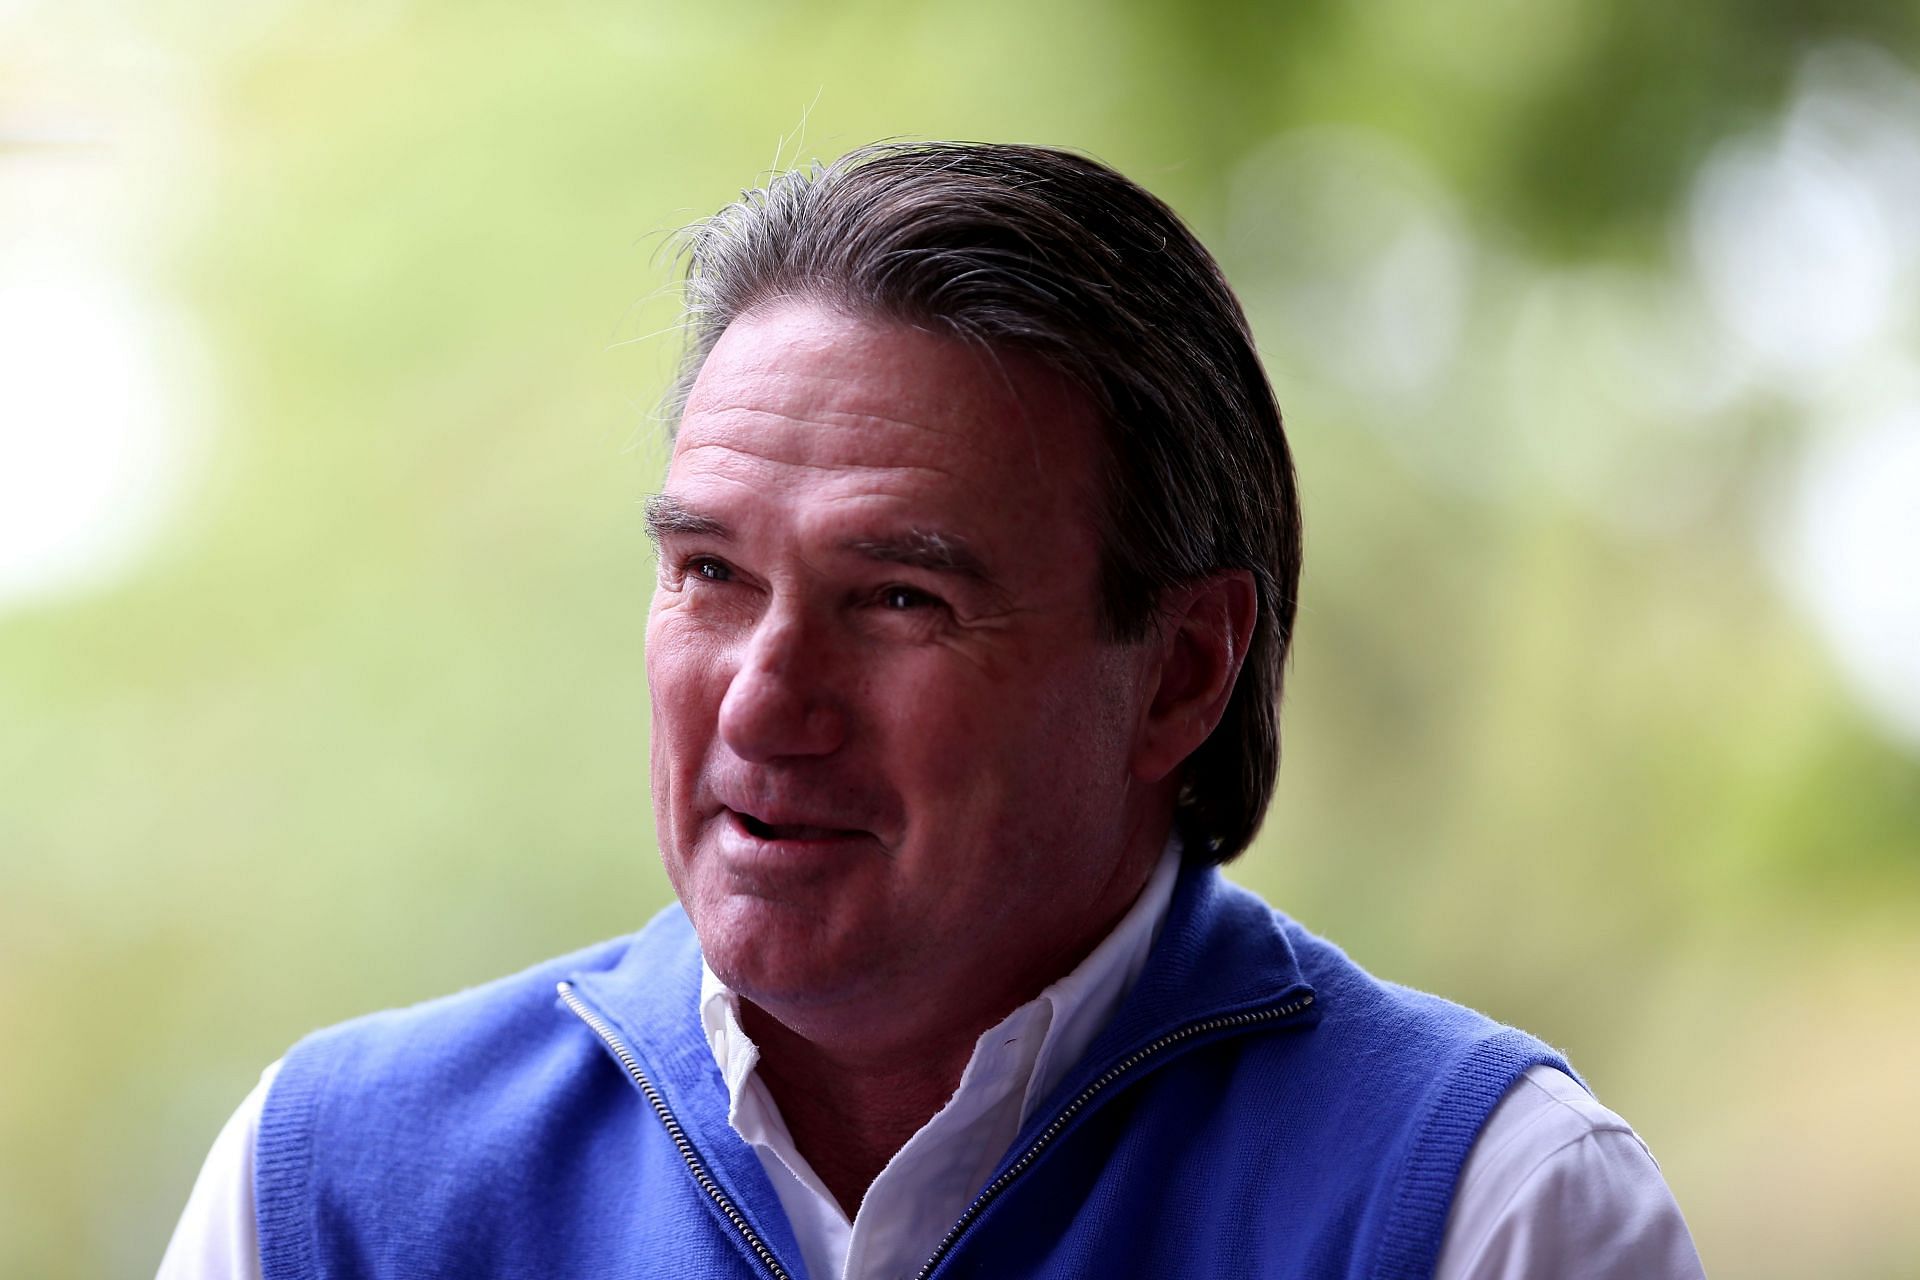 Jimmy Connors giving an interview. [File photo]